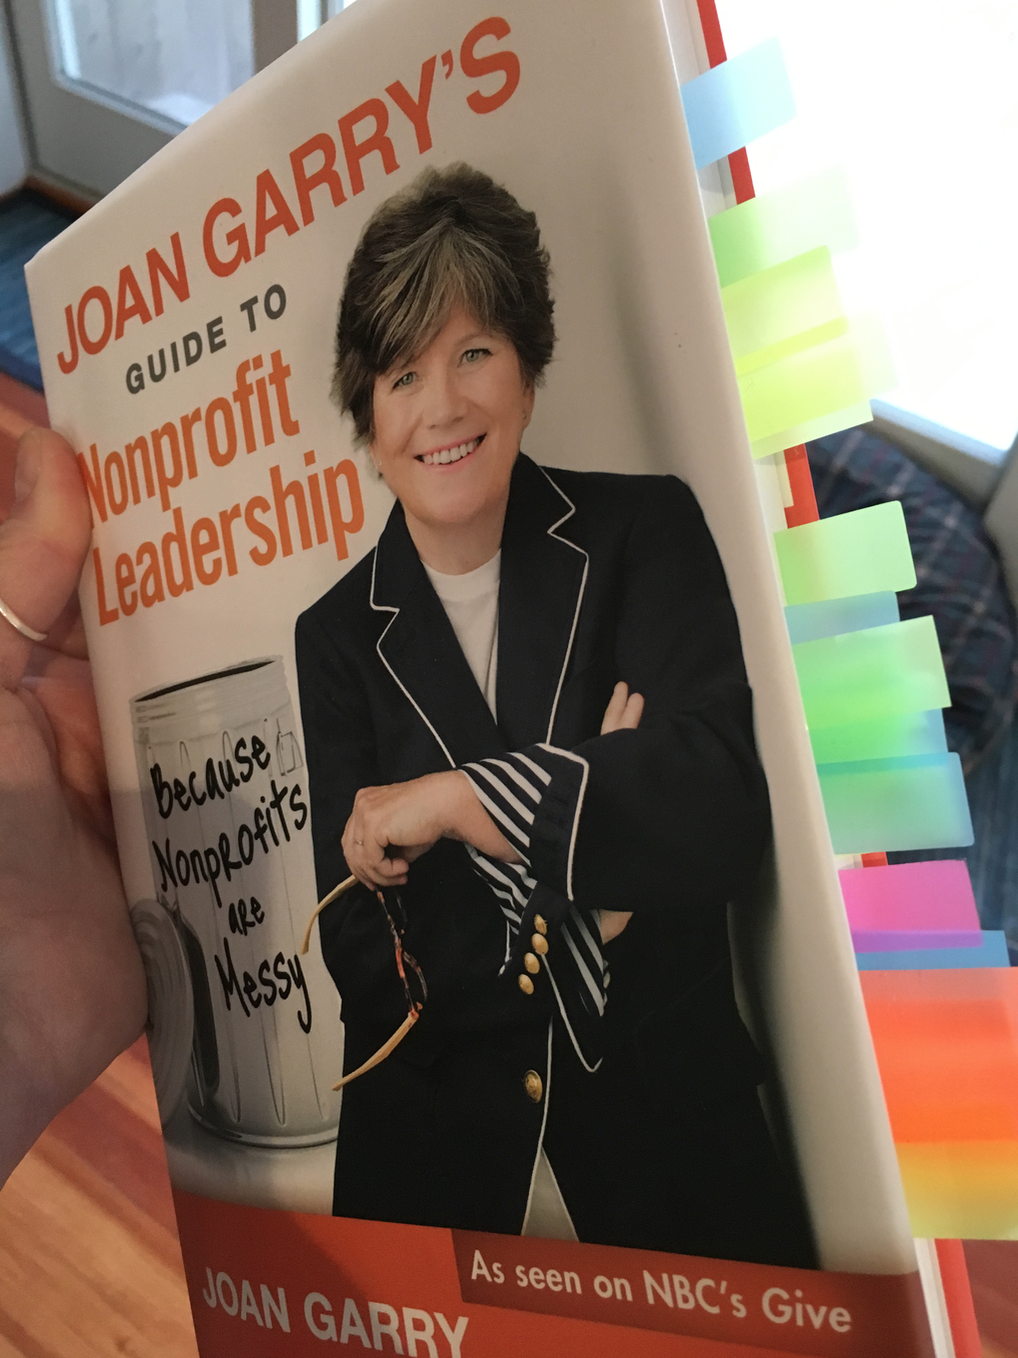 Joan Garry's Guide to Nonprofit Leadership — invaluable advice